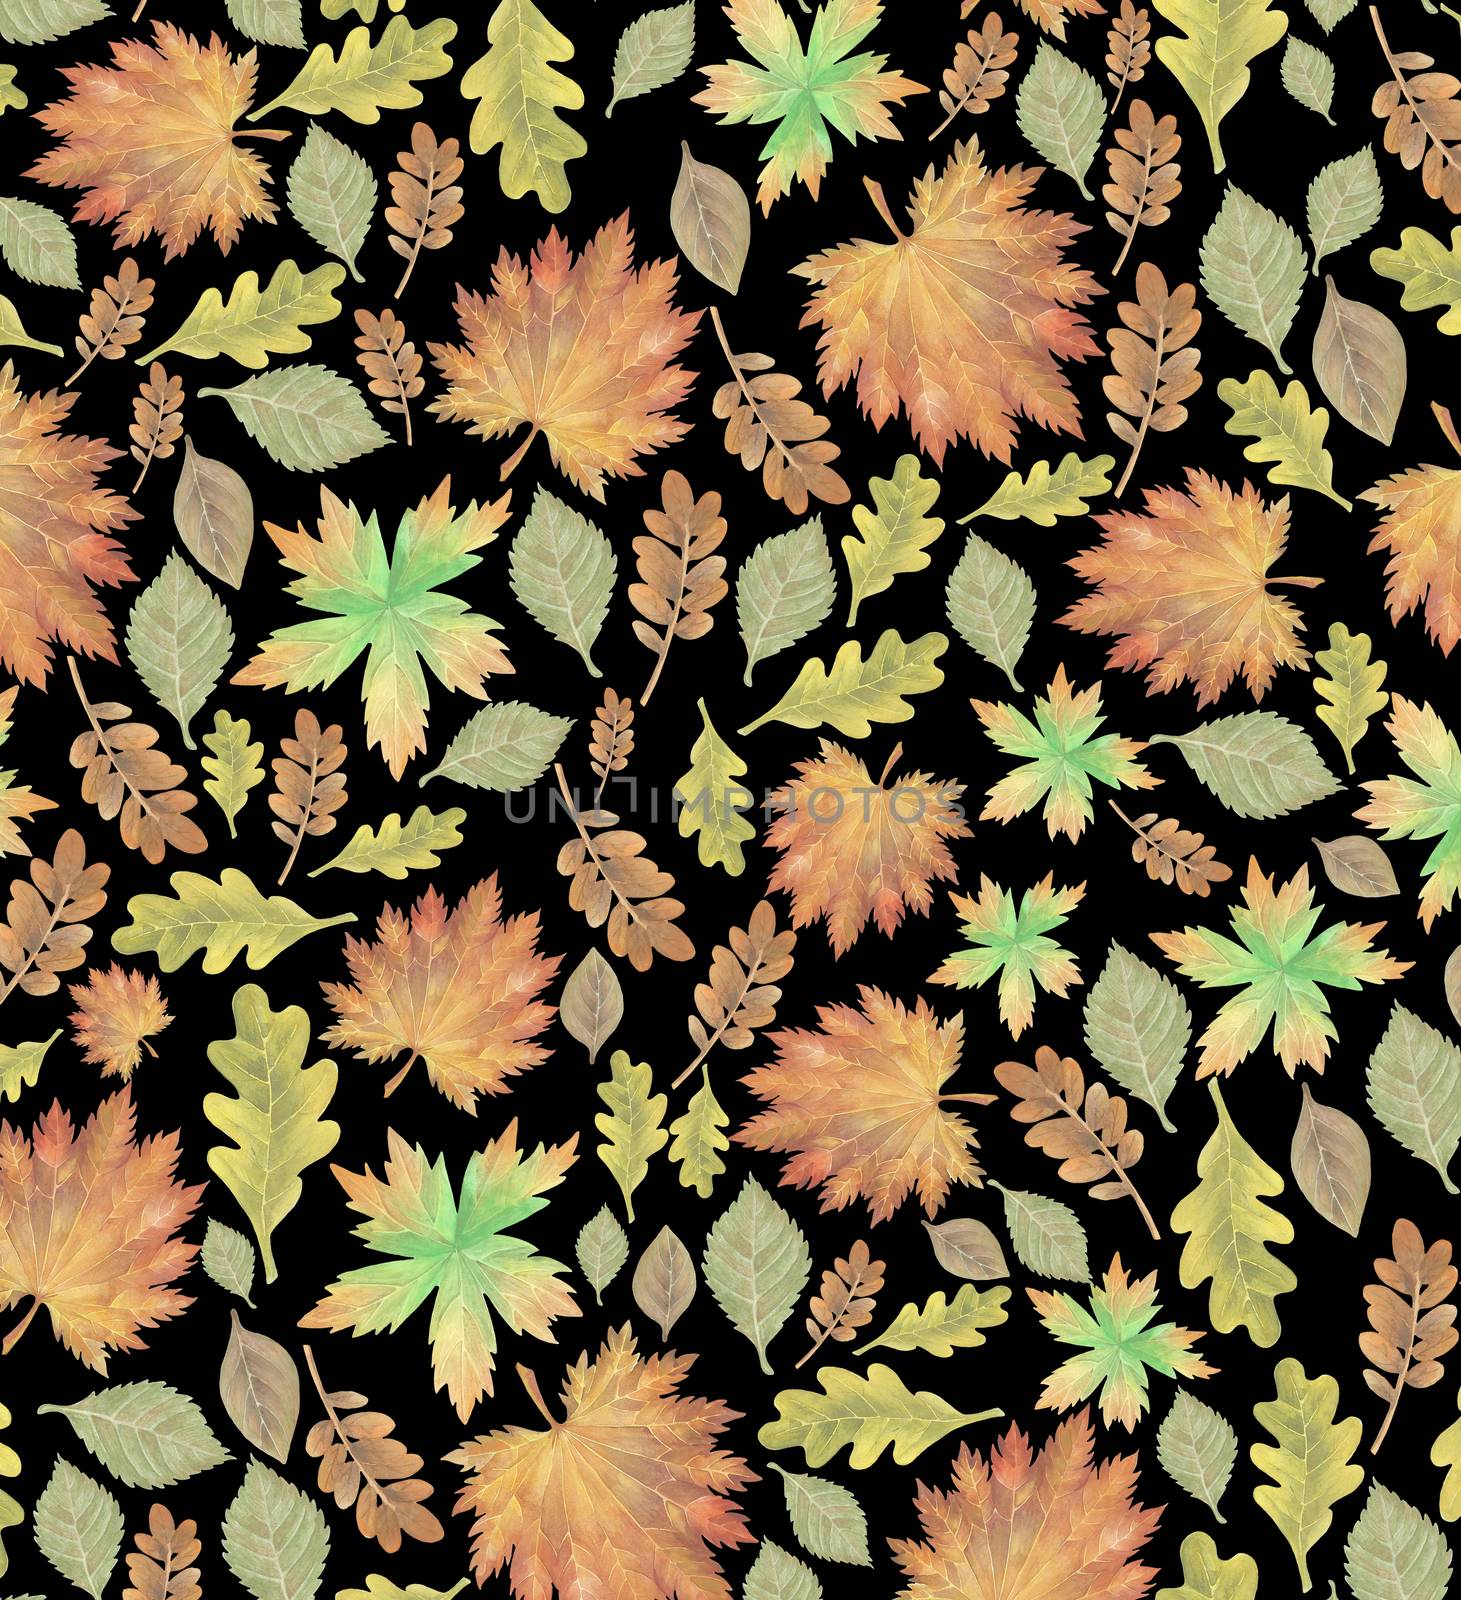 Seamless pattern with different autumn leaves, hand-drawn watercolor painting